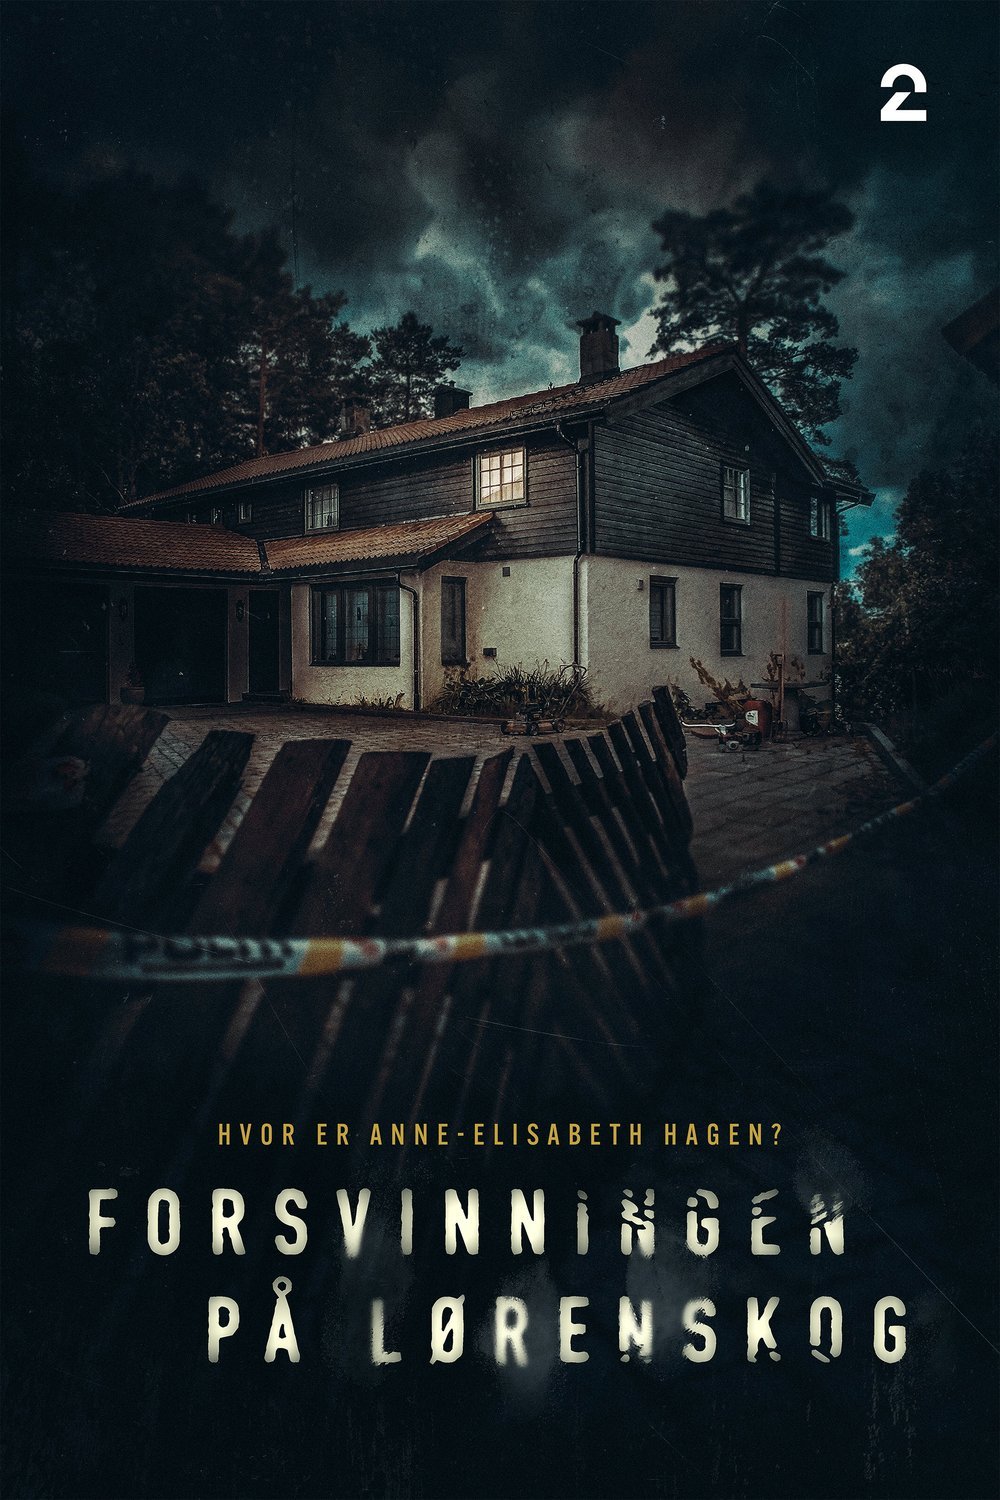 Norwegian poster of the movie The Lorenskog Disappearance